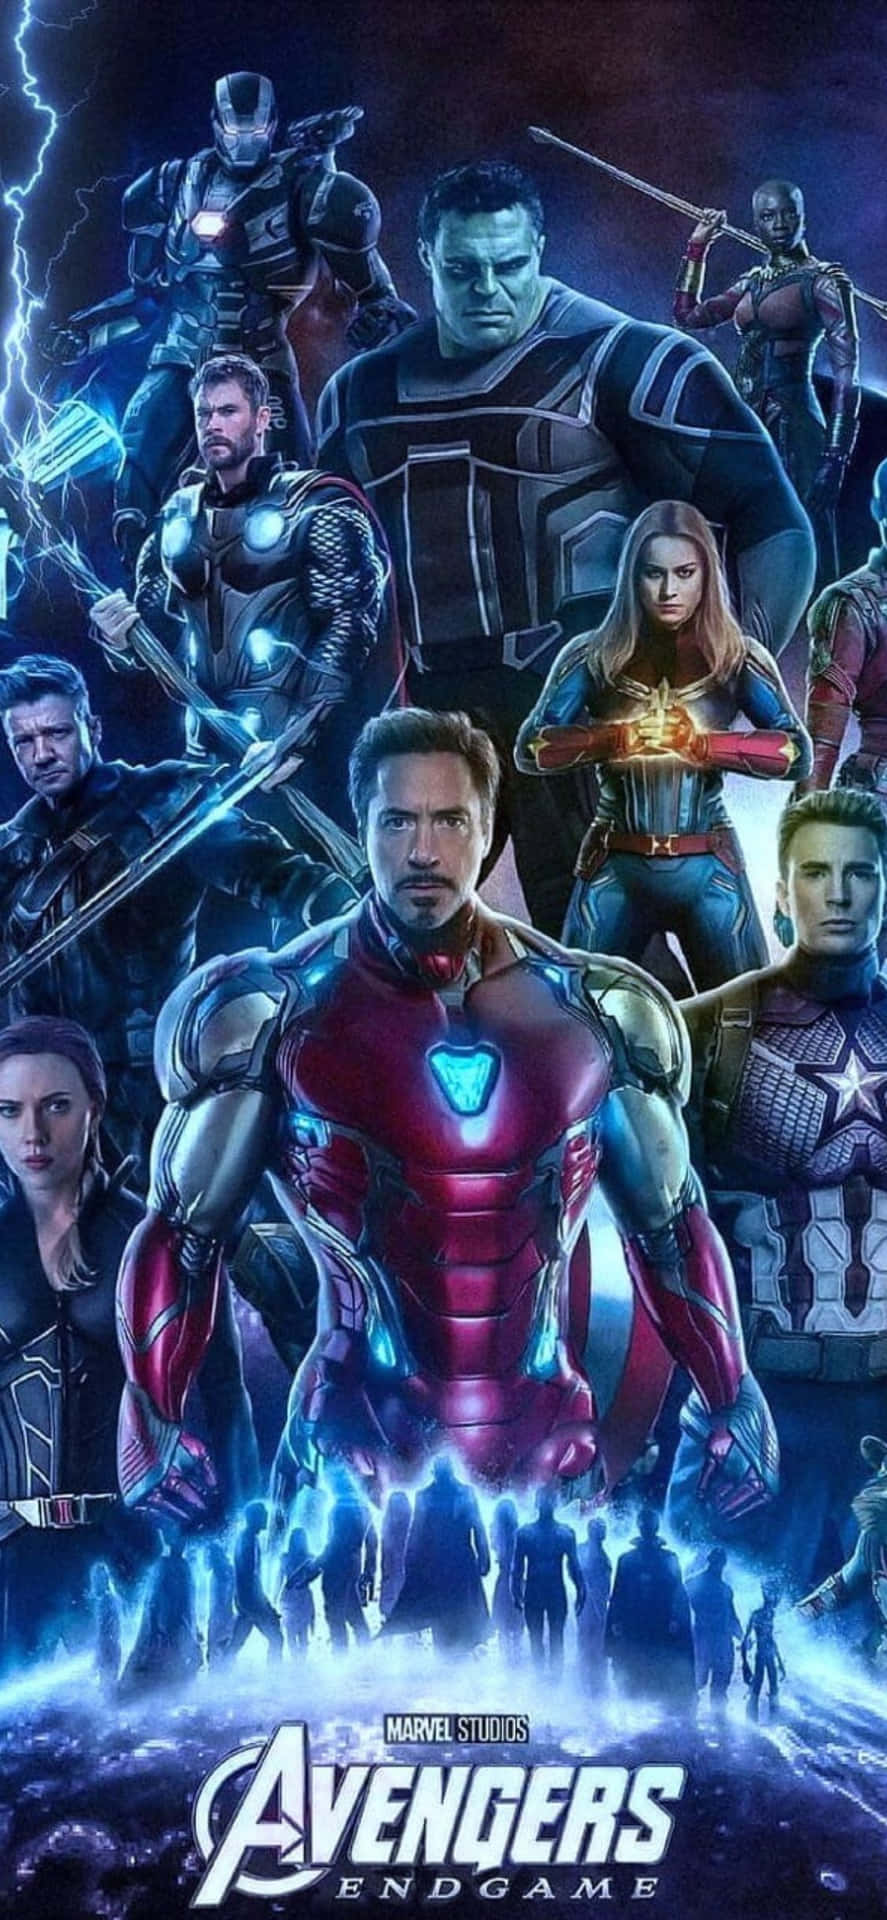 iPhone XS Avengers Endgame Movie Poster Background